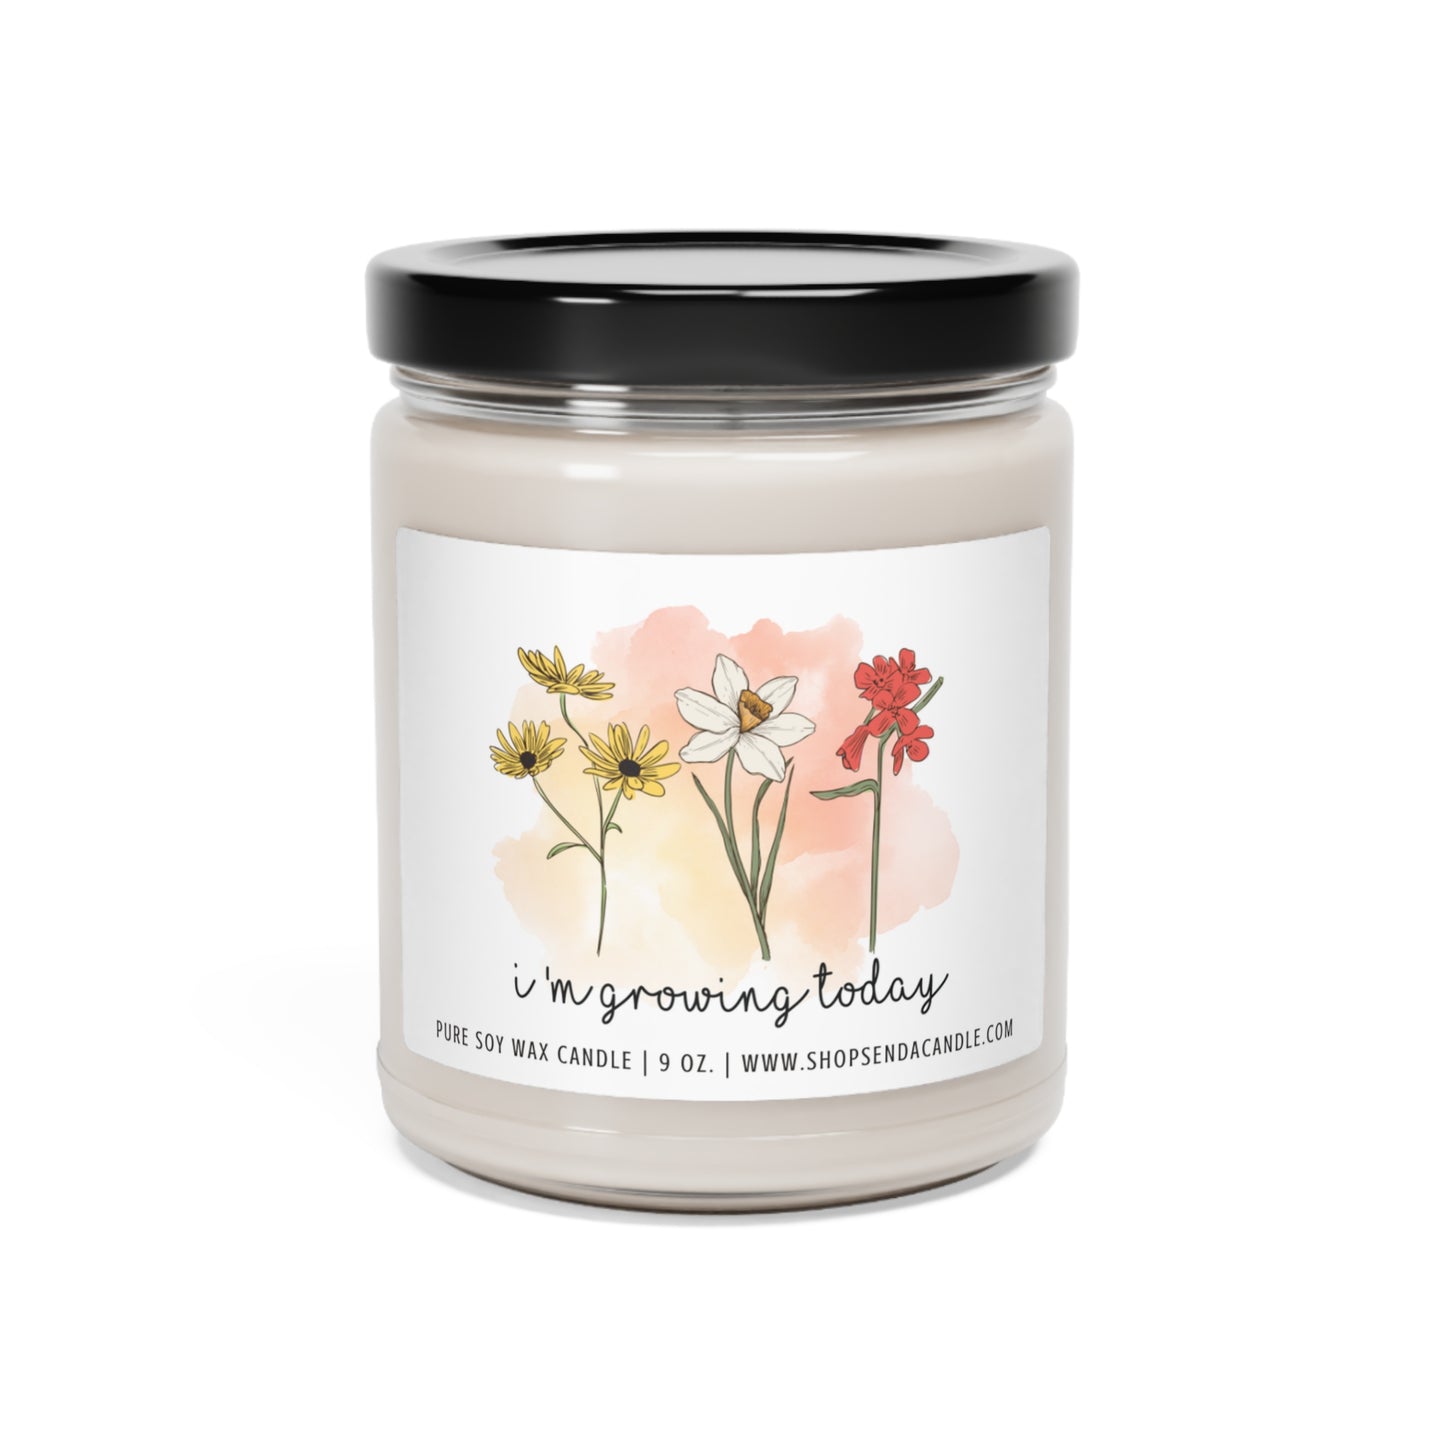 Inspirational Friend Gifts | Send A Candle